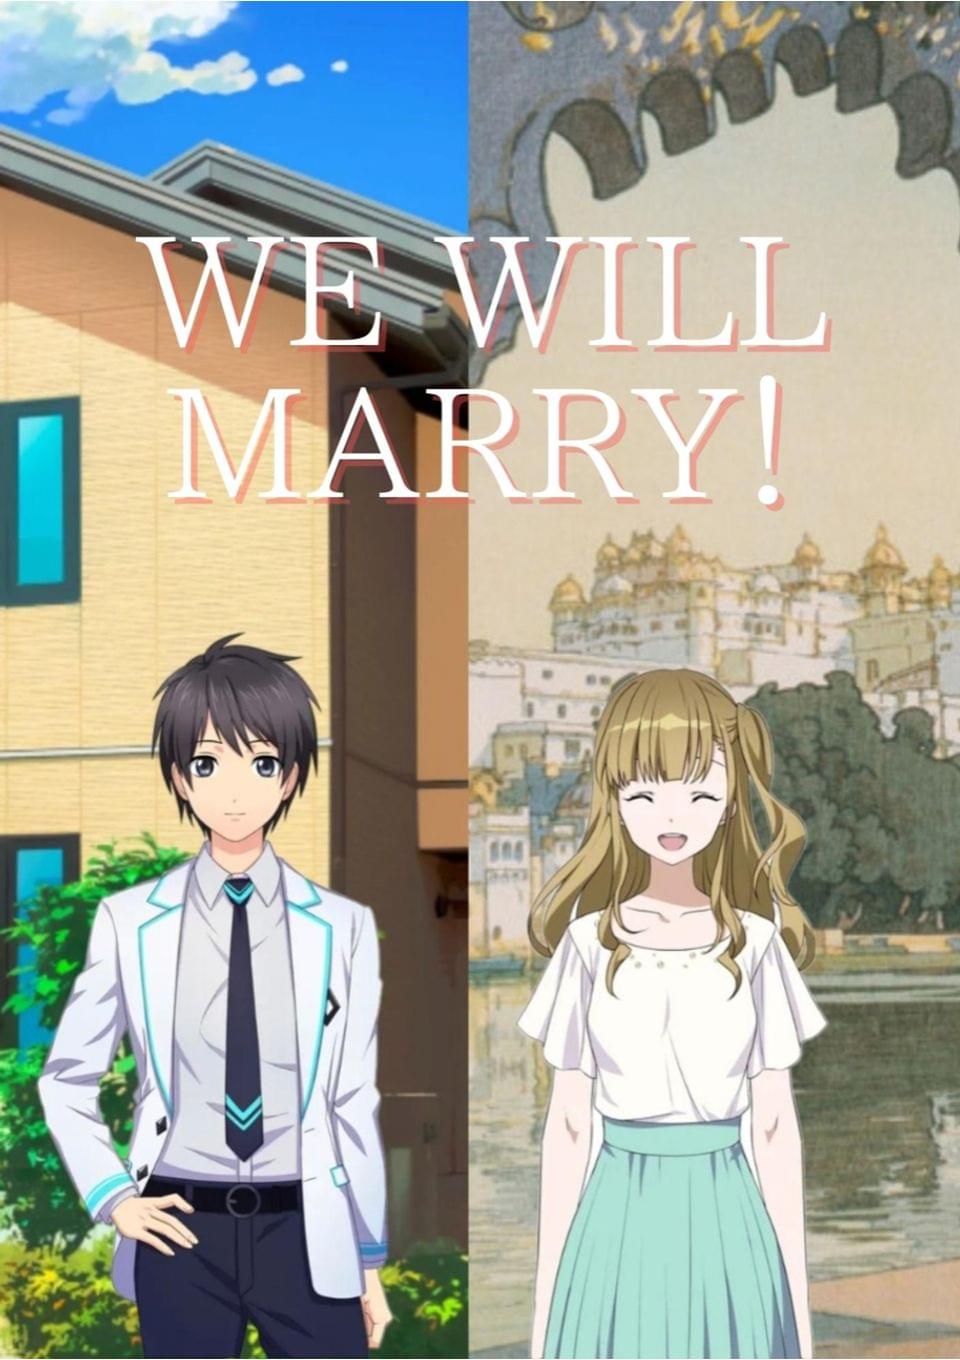 WE WILL MARRY!